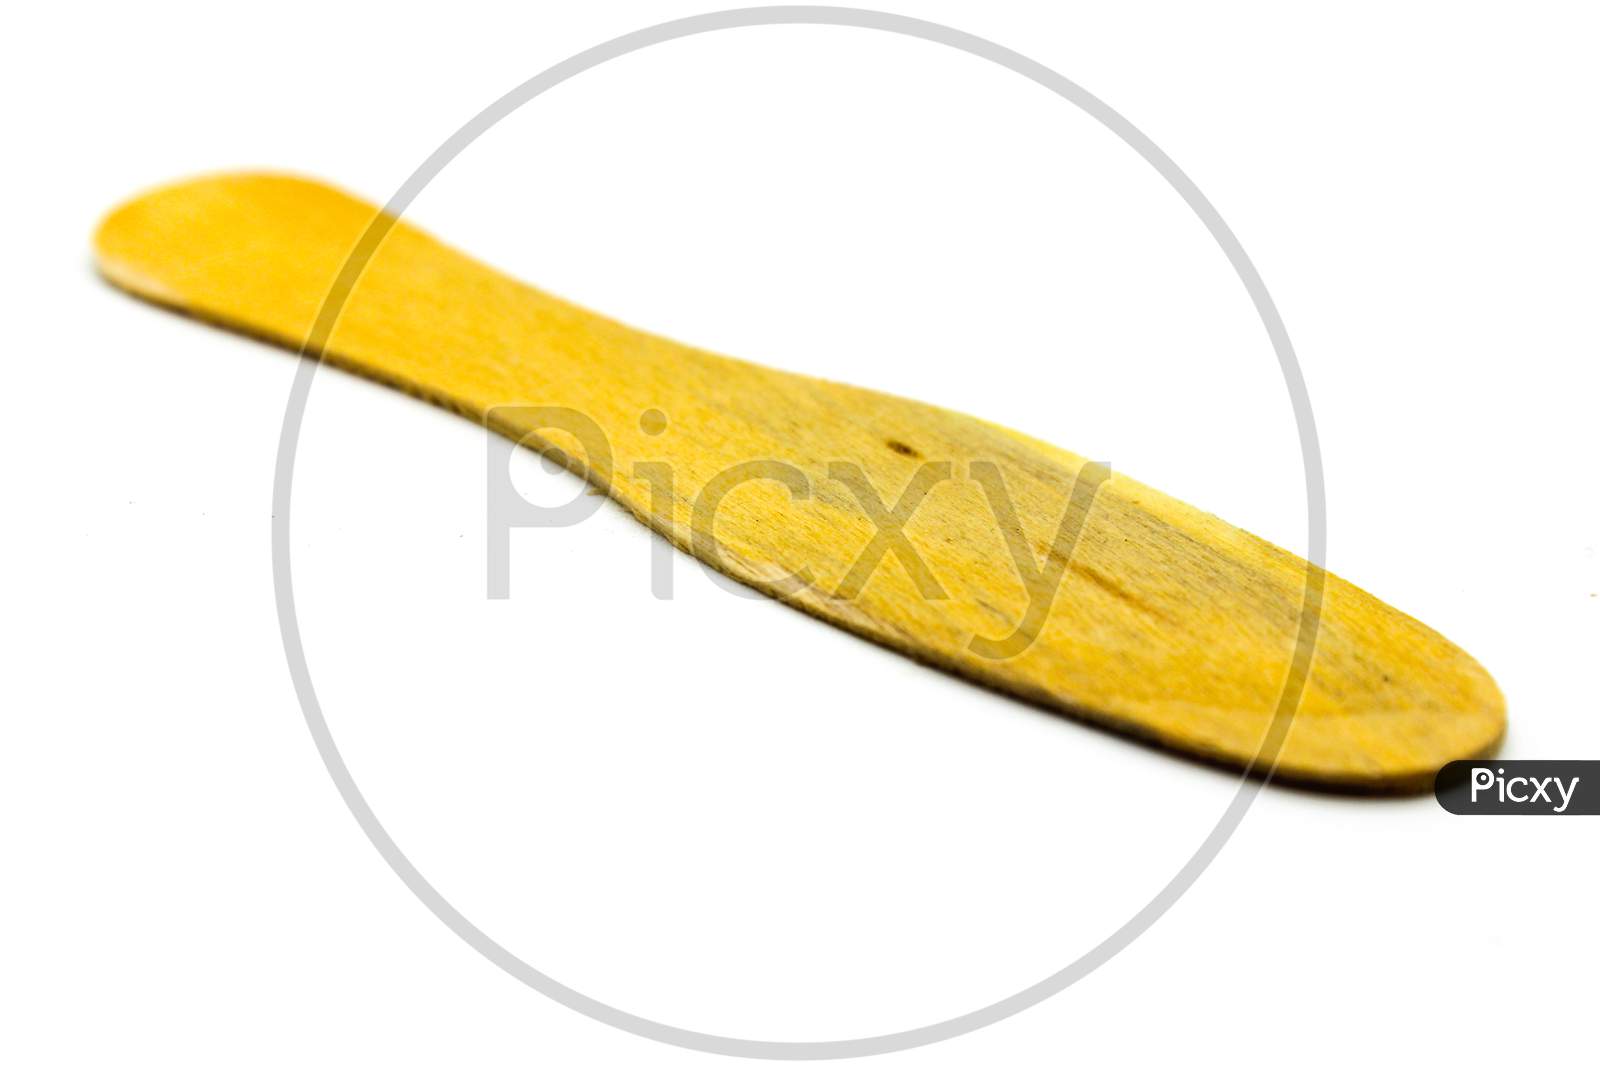 Wood Spoon Isolated On White Background With Selective Focus